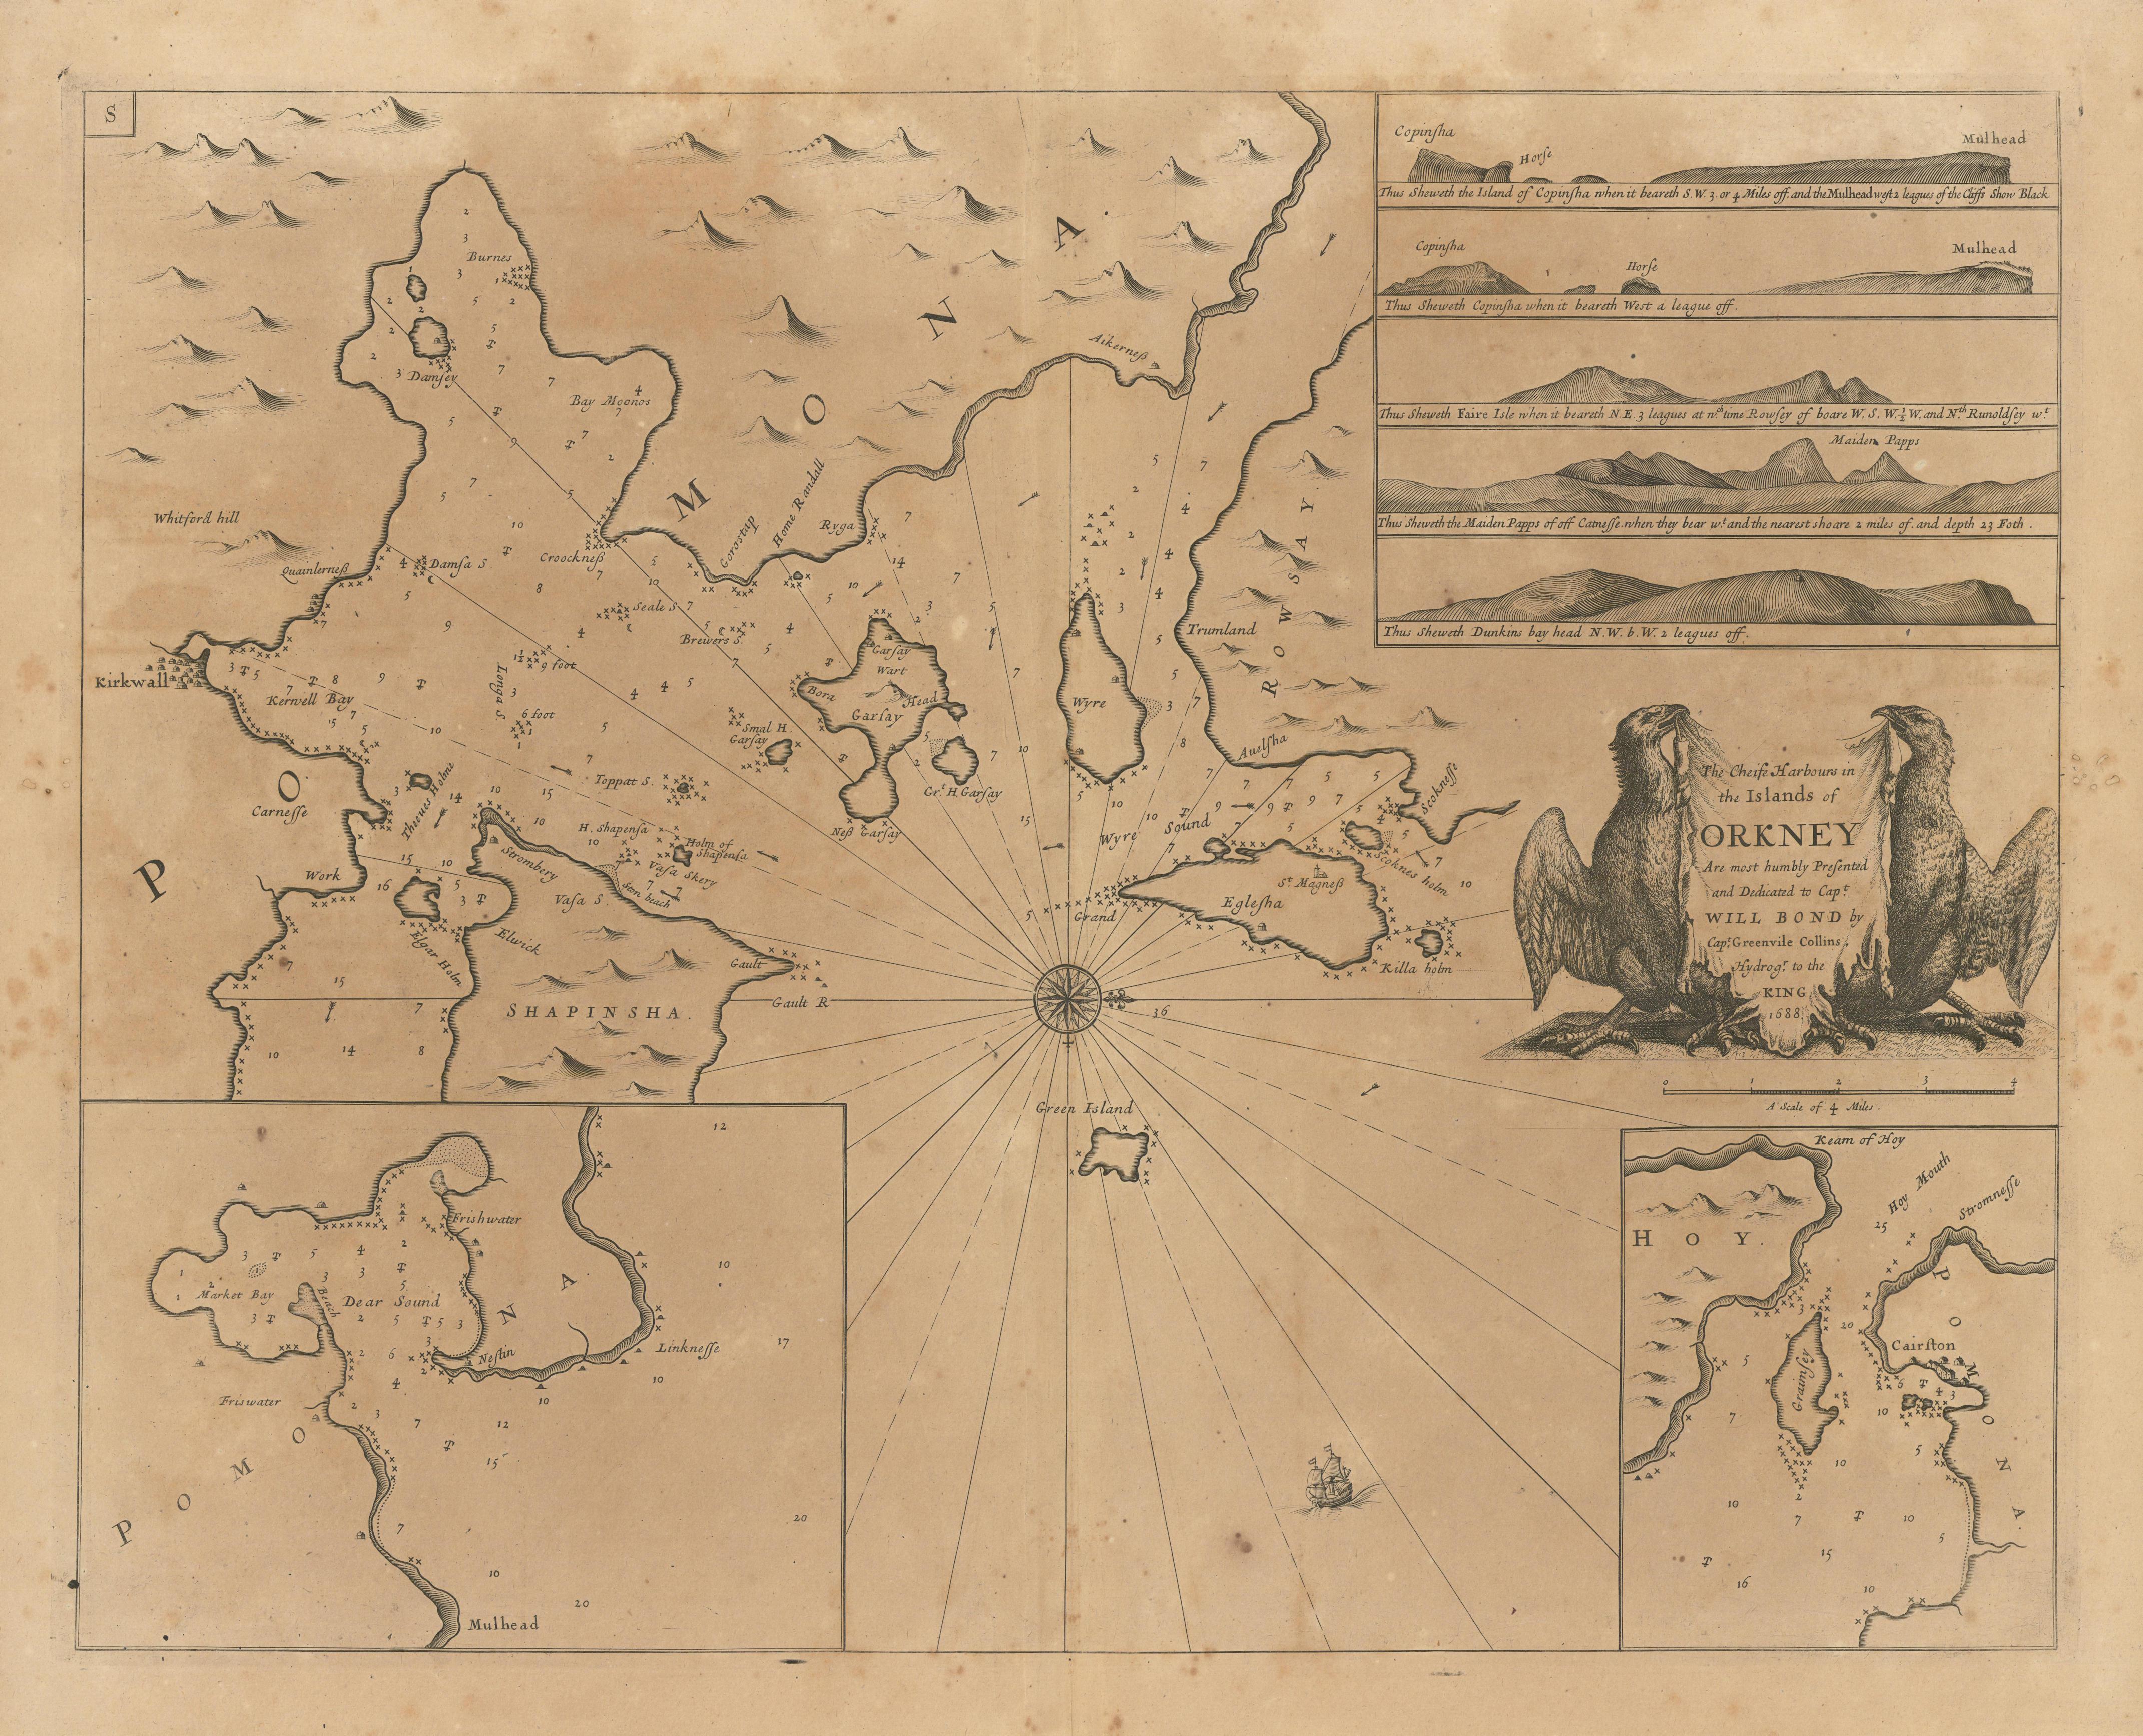 Associate Product Chiefe Harbours in the Islands of Orkney sea chart. Kirkwall.COLLINS 1693 map